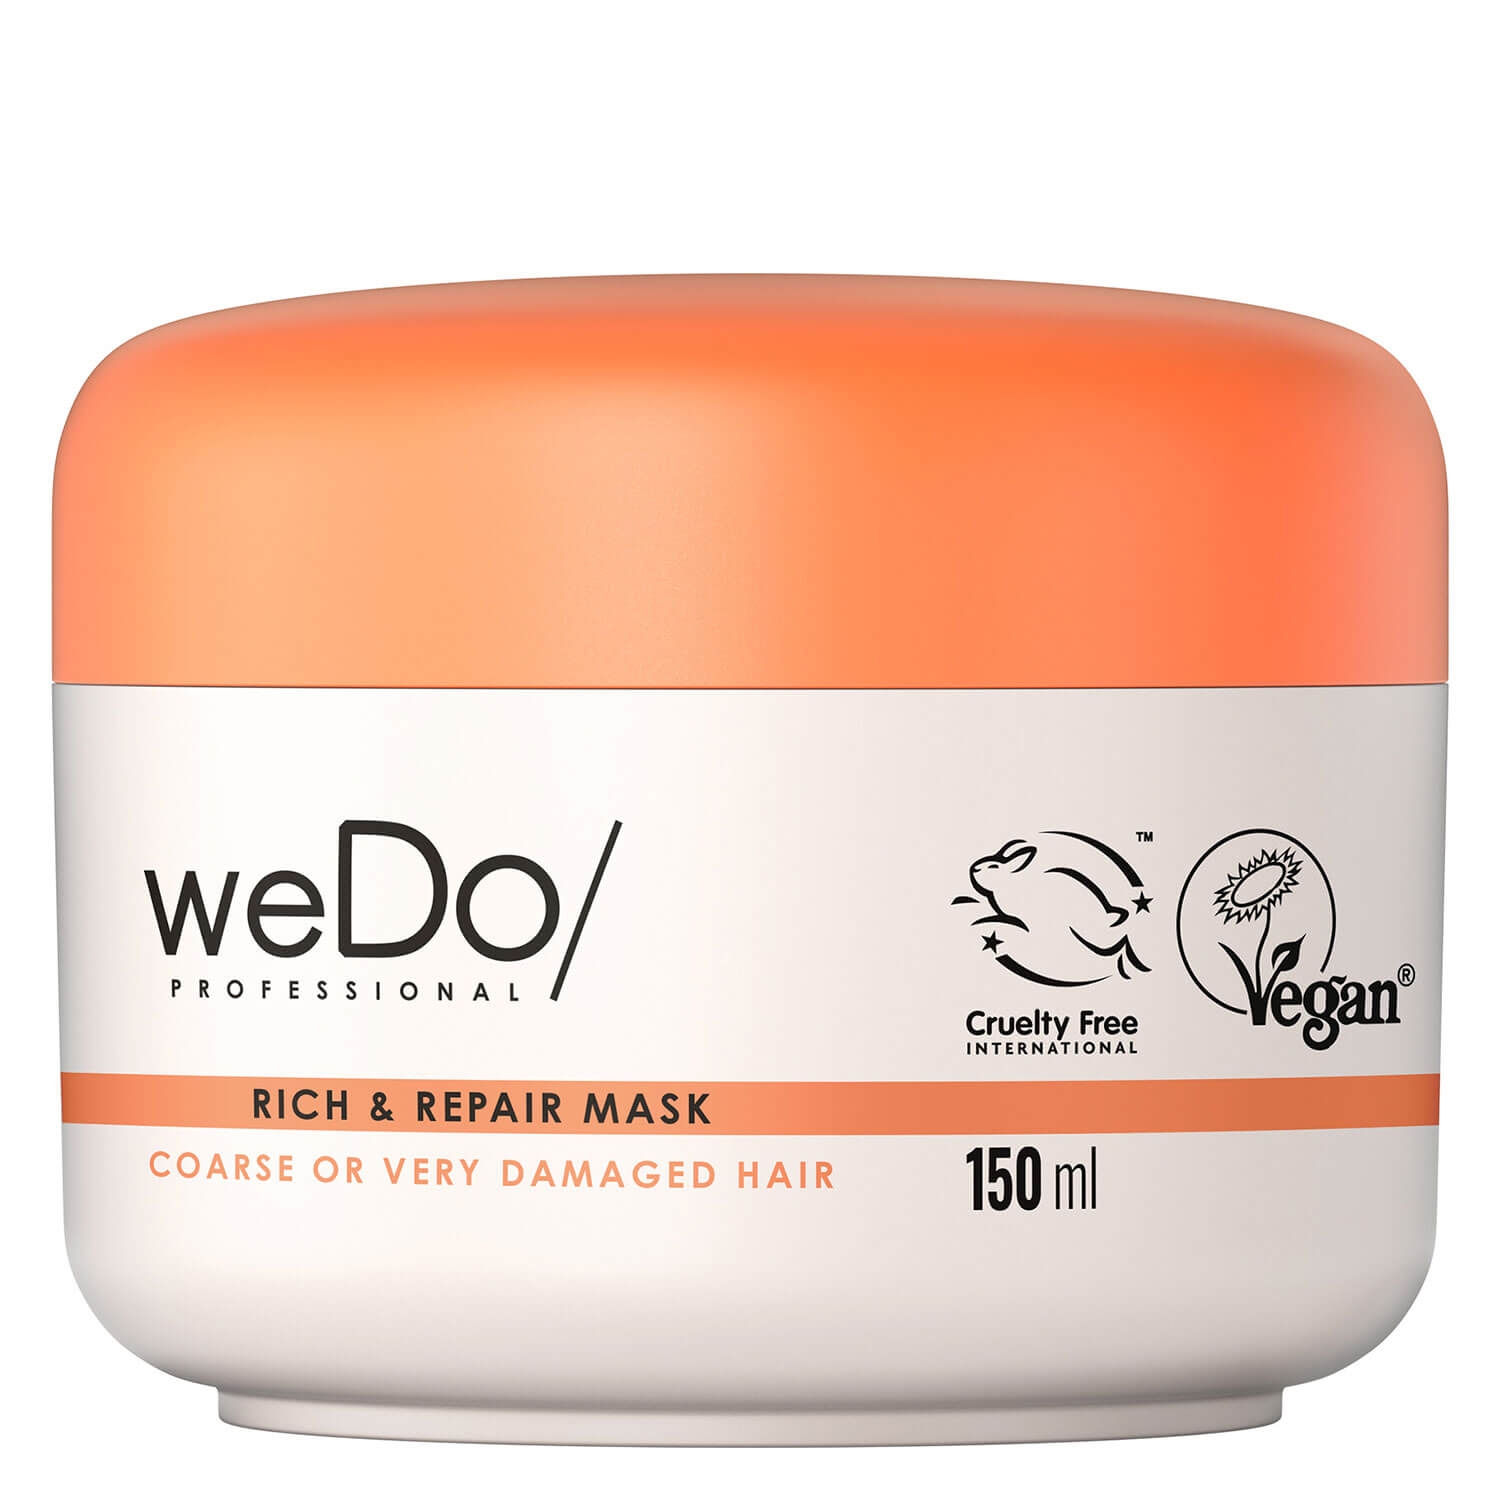 Product image from weDo/ - Rich & Repair Mask